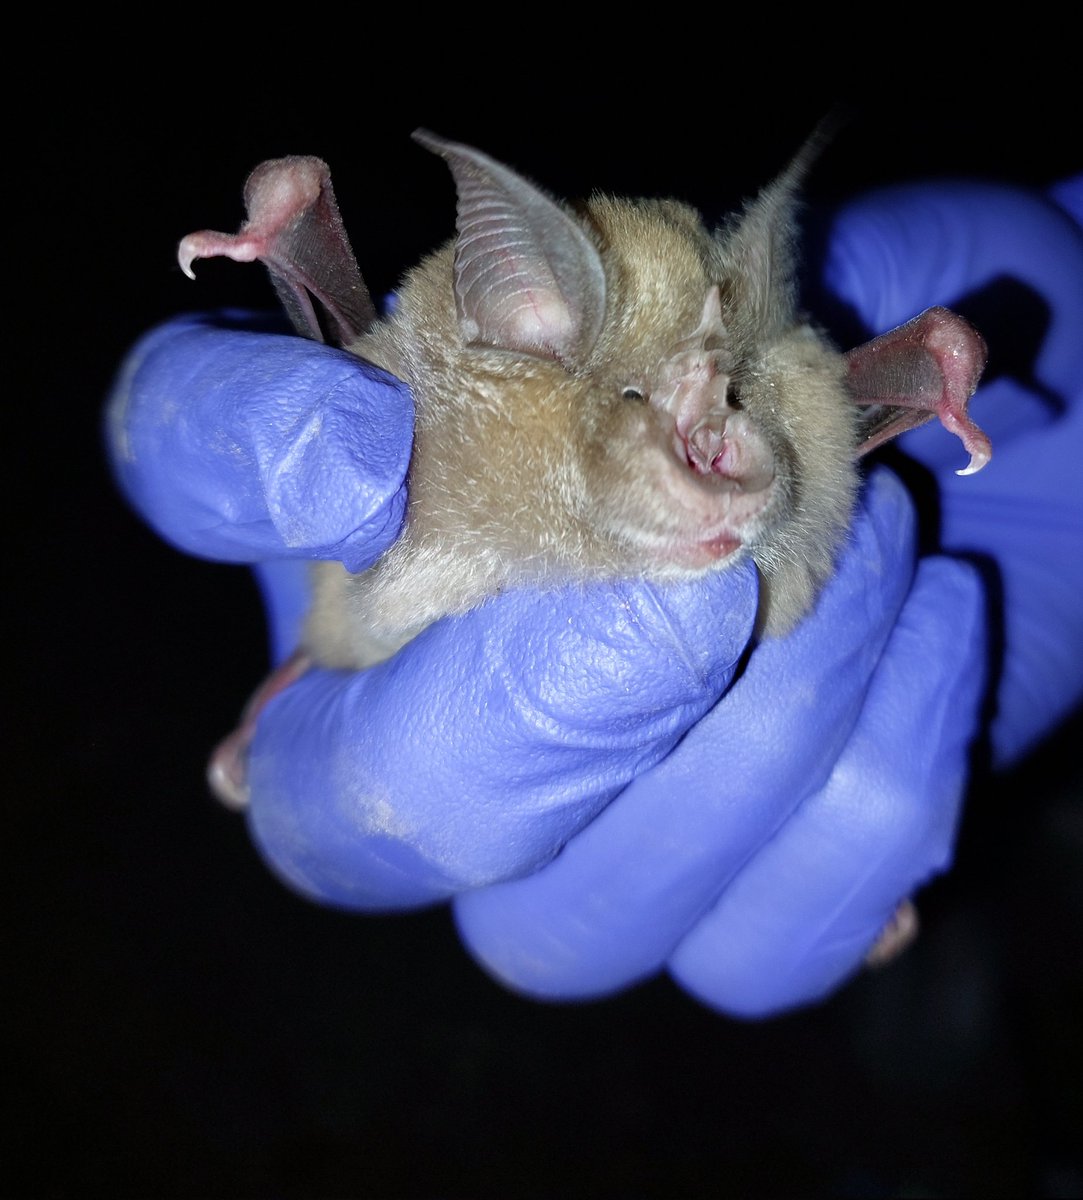 Funded PhD opportunity with me and @vincentwildlife starting Sept 2023. Let's see if we can guide these amazing #bats around anthropogenic hazards! sussex.ac.uk/study/fees-fun…?